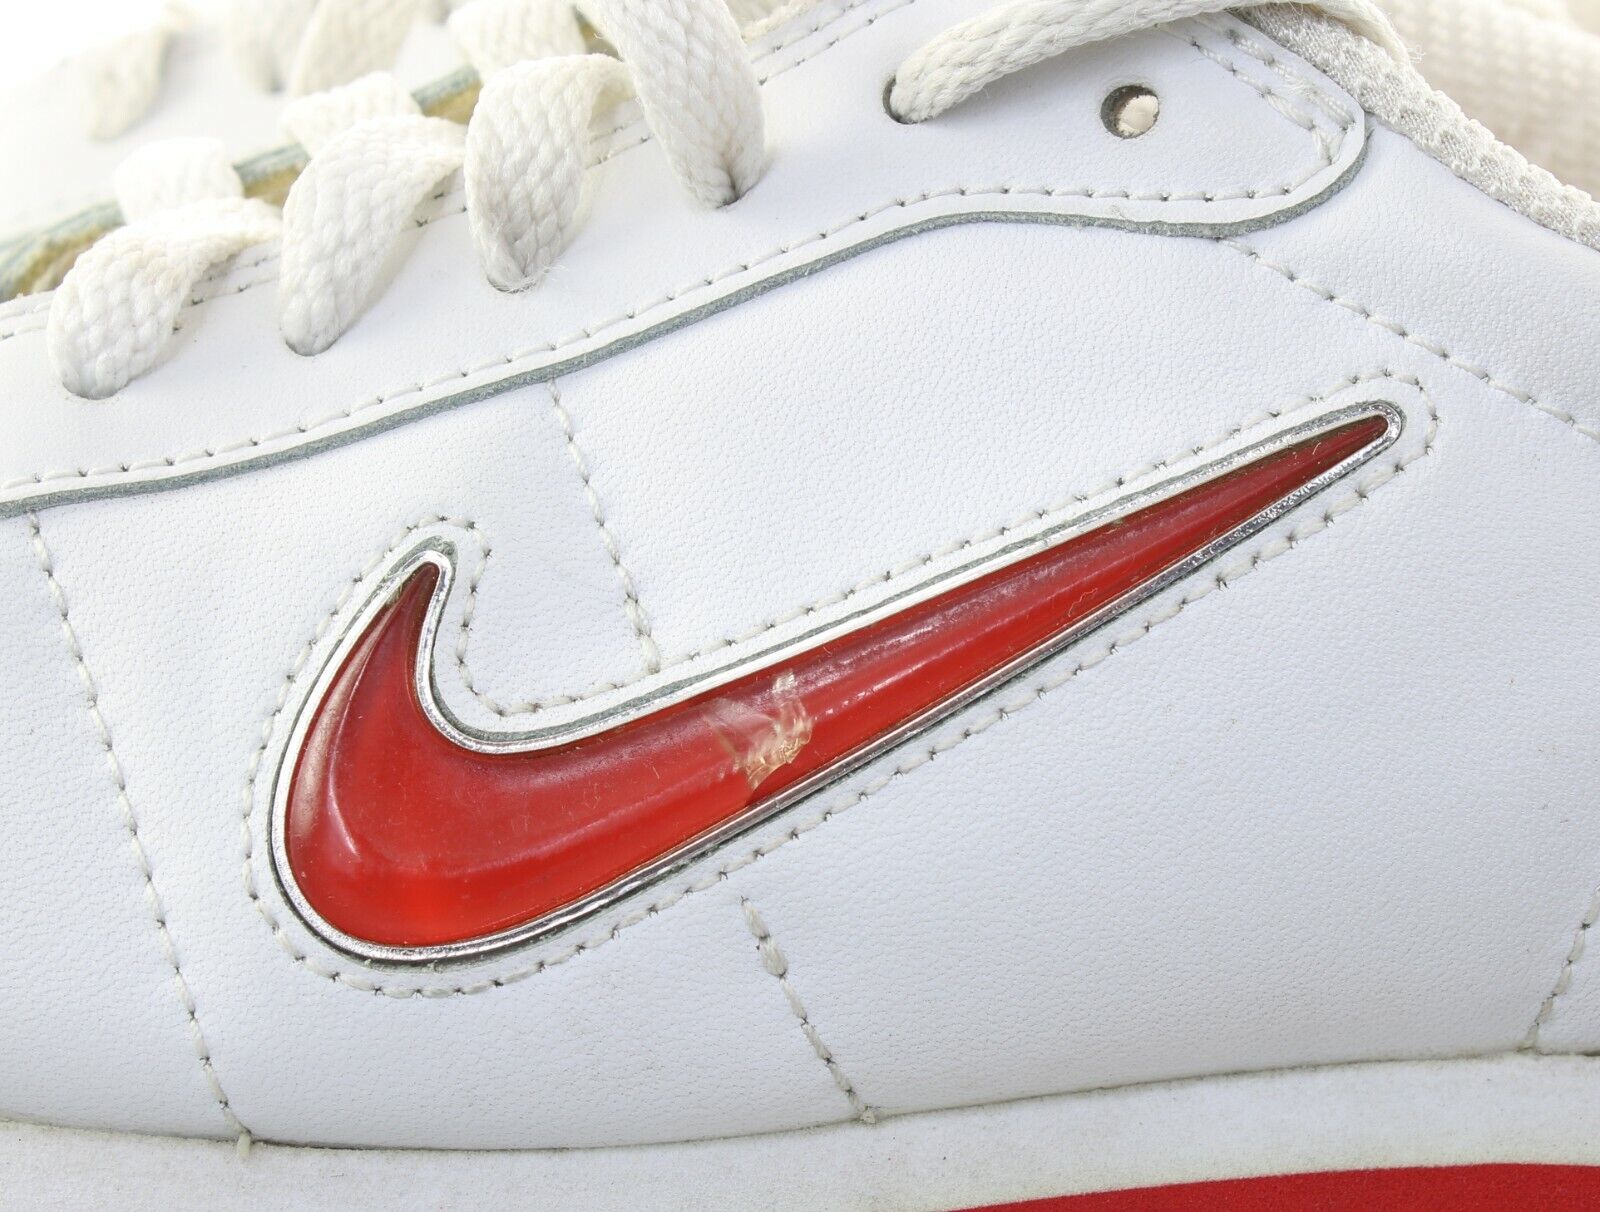 VTG NIKE CORTEZ WOMENS 9 WHITE RED LEATHER TENNIS SHOES RUNNING 304742